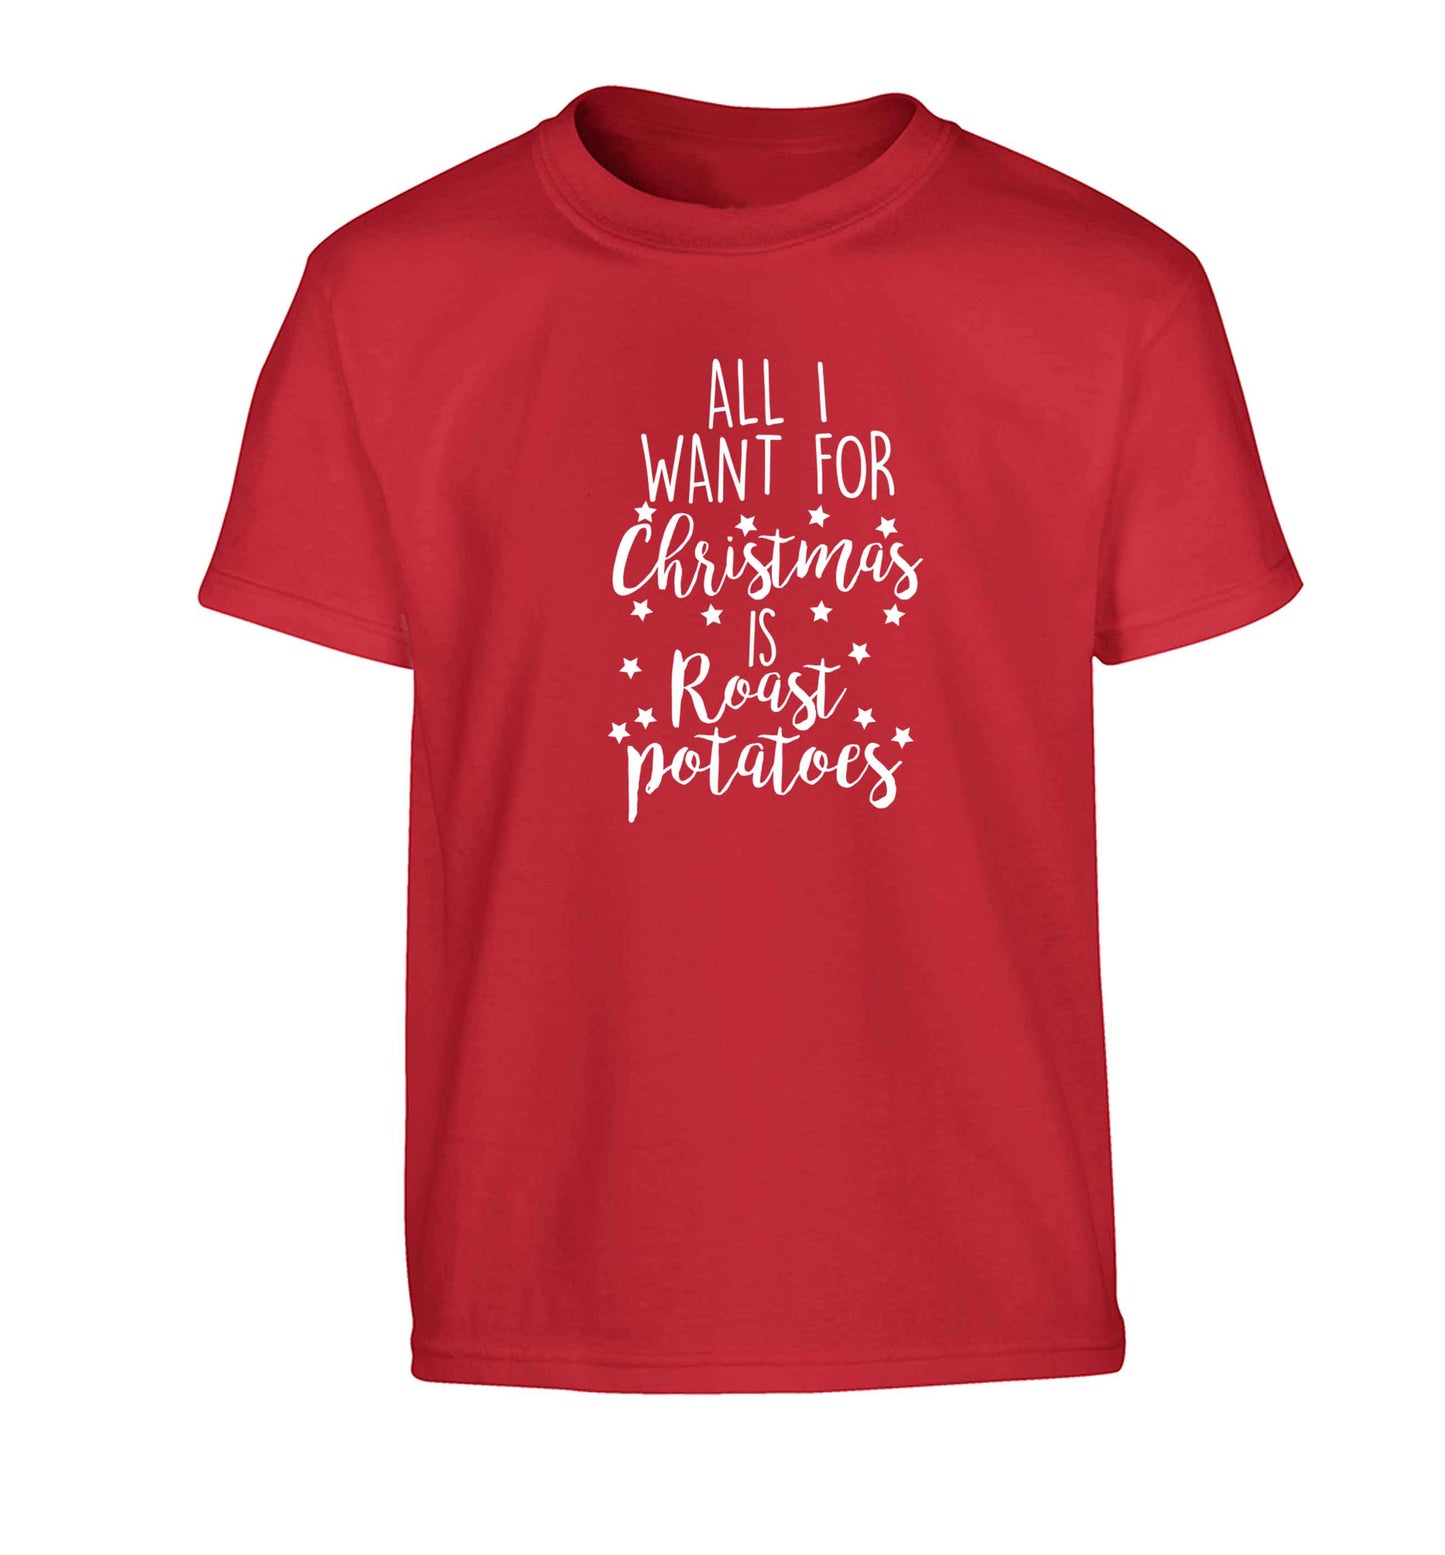 All I want for Christmas is roast potatoes Children's red Tshirt 12-13 Years